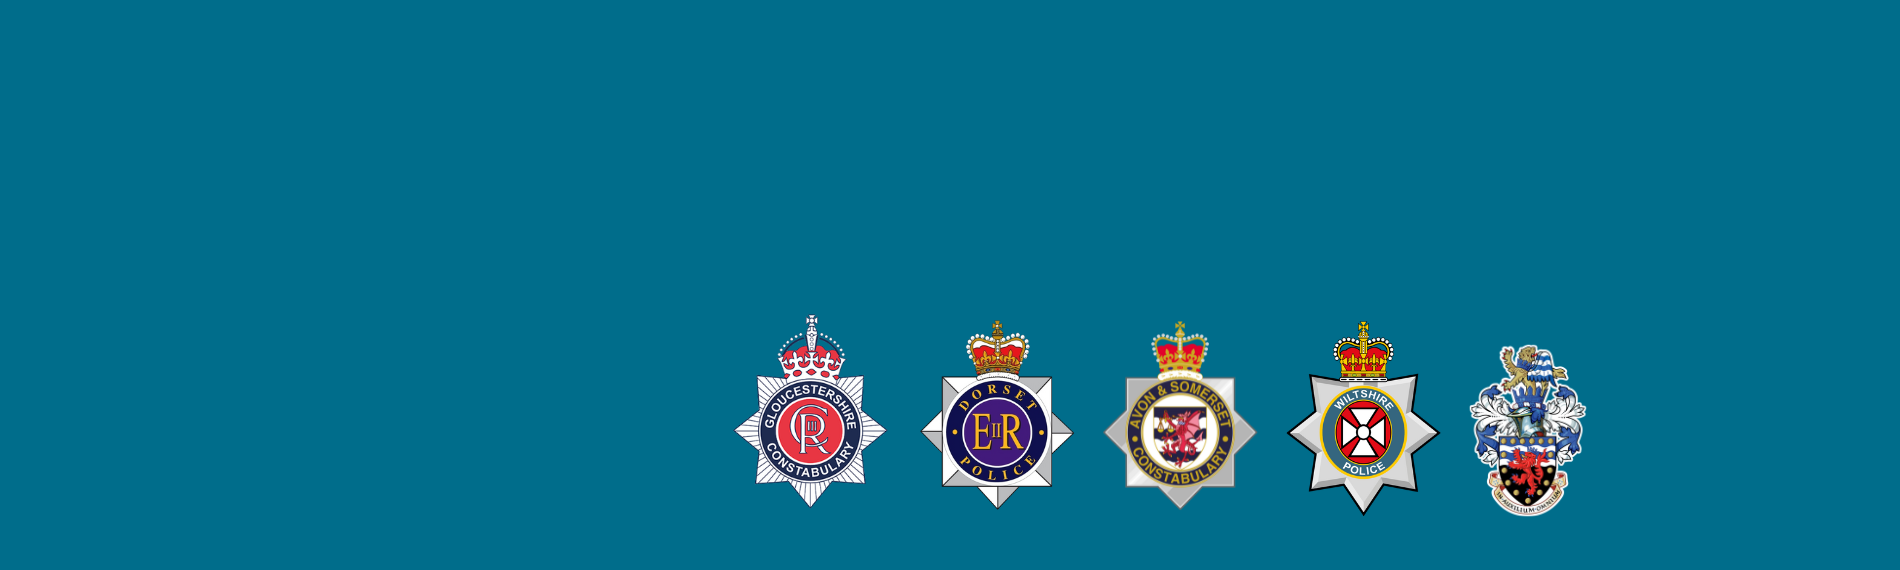 South-West-Police-1900x630.png